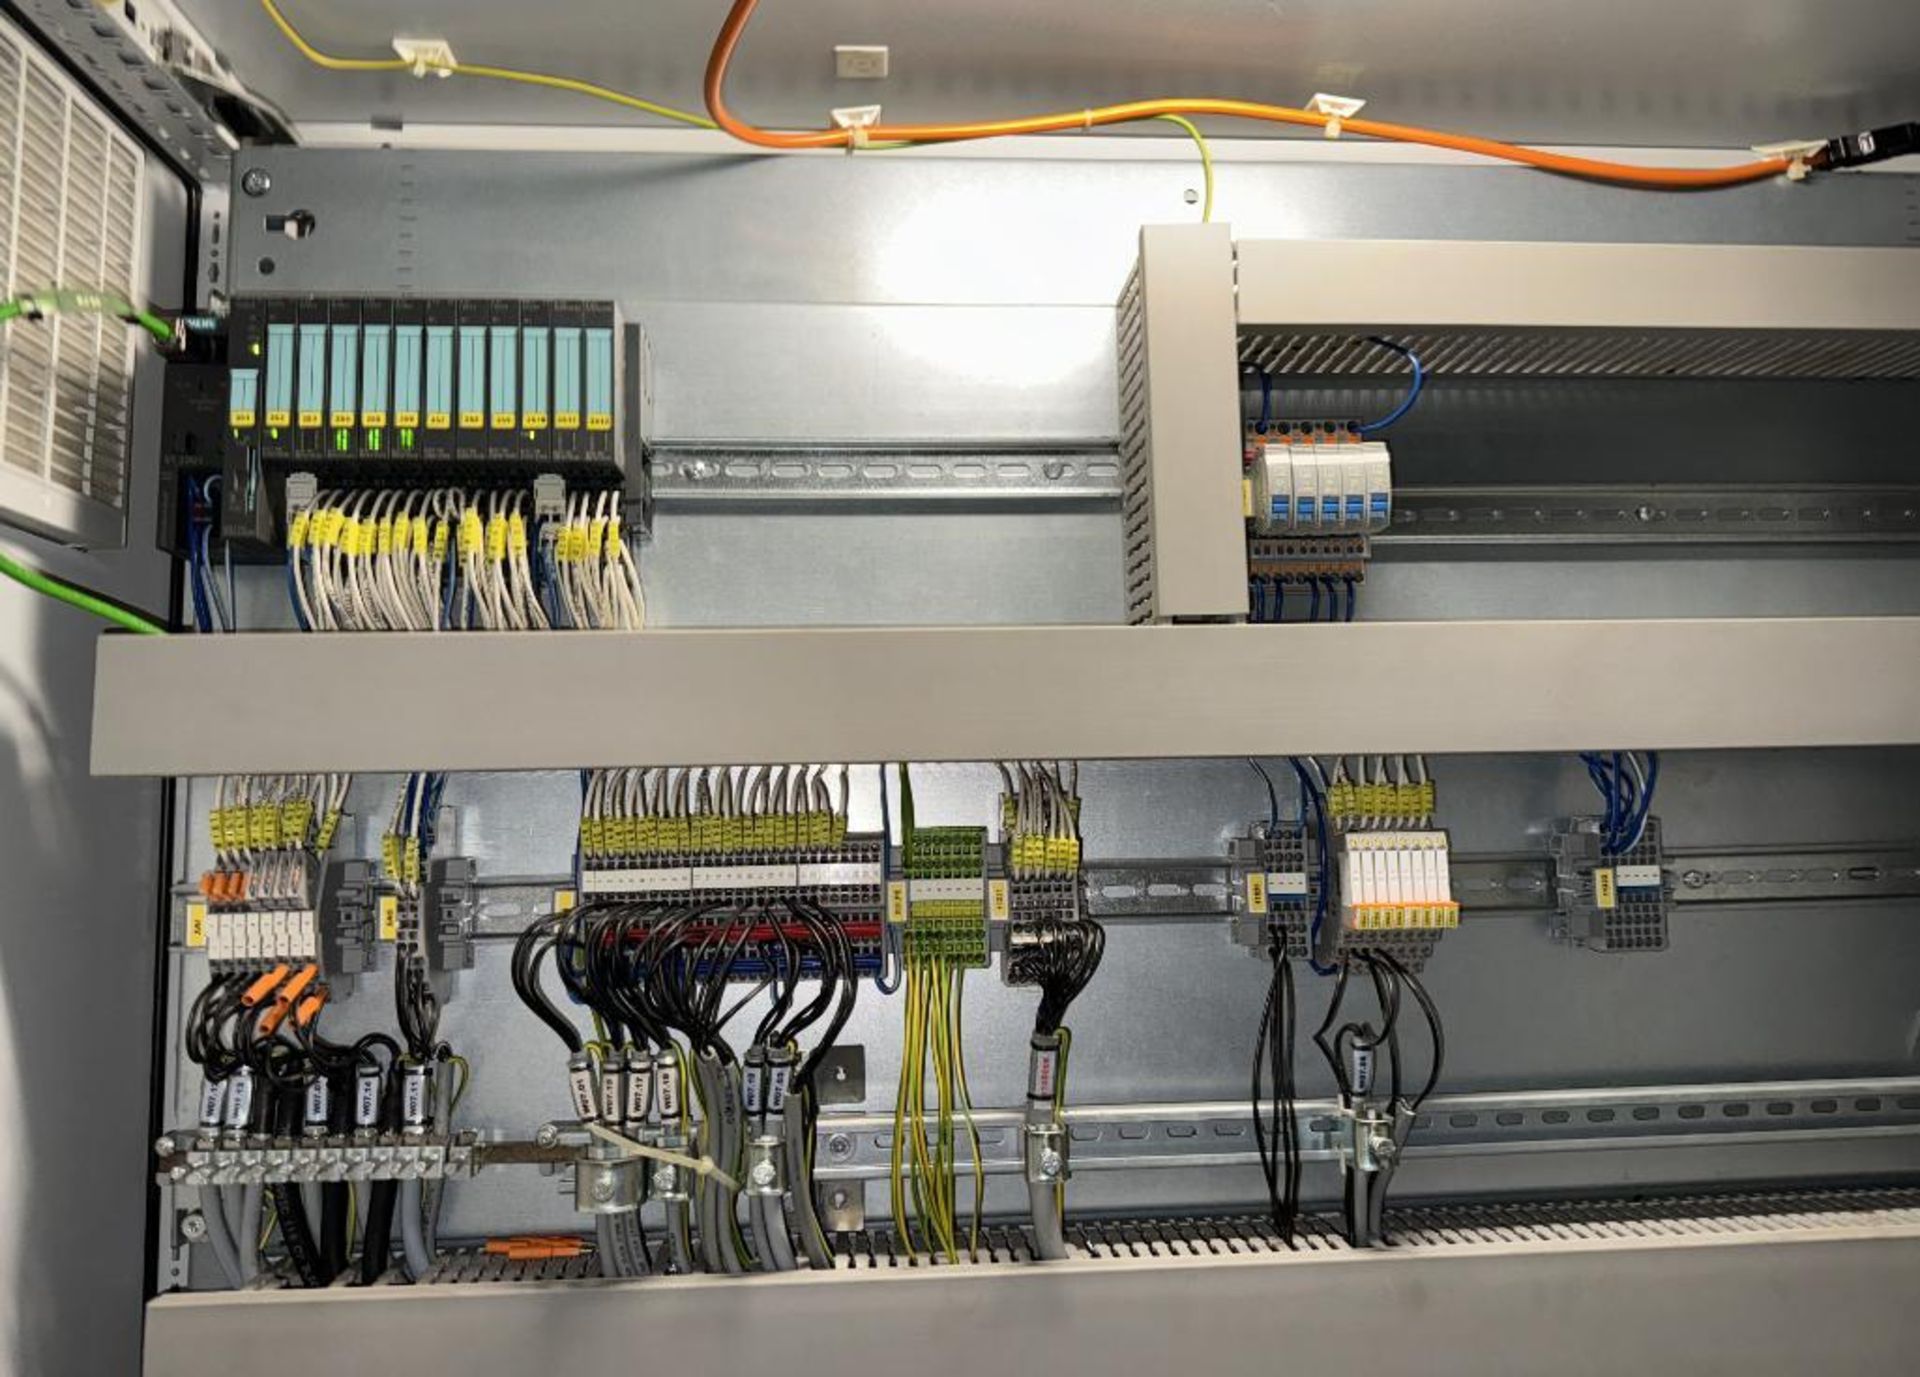 Lot Of (3) Control Panels. With Siemens Simatic HMI Touch Panel, Siemens PLC's, Eaton drives, misc. - Image 9 of 35